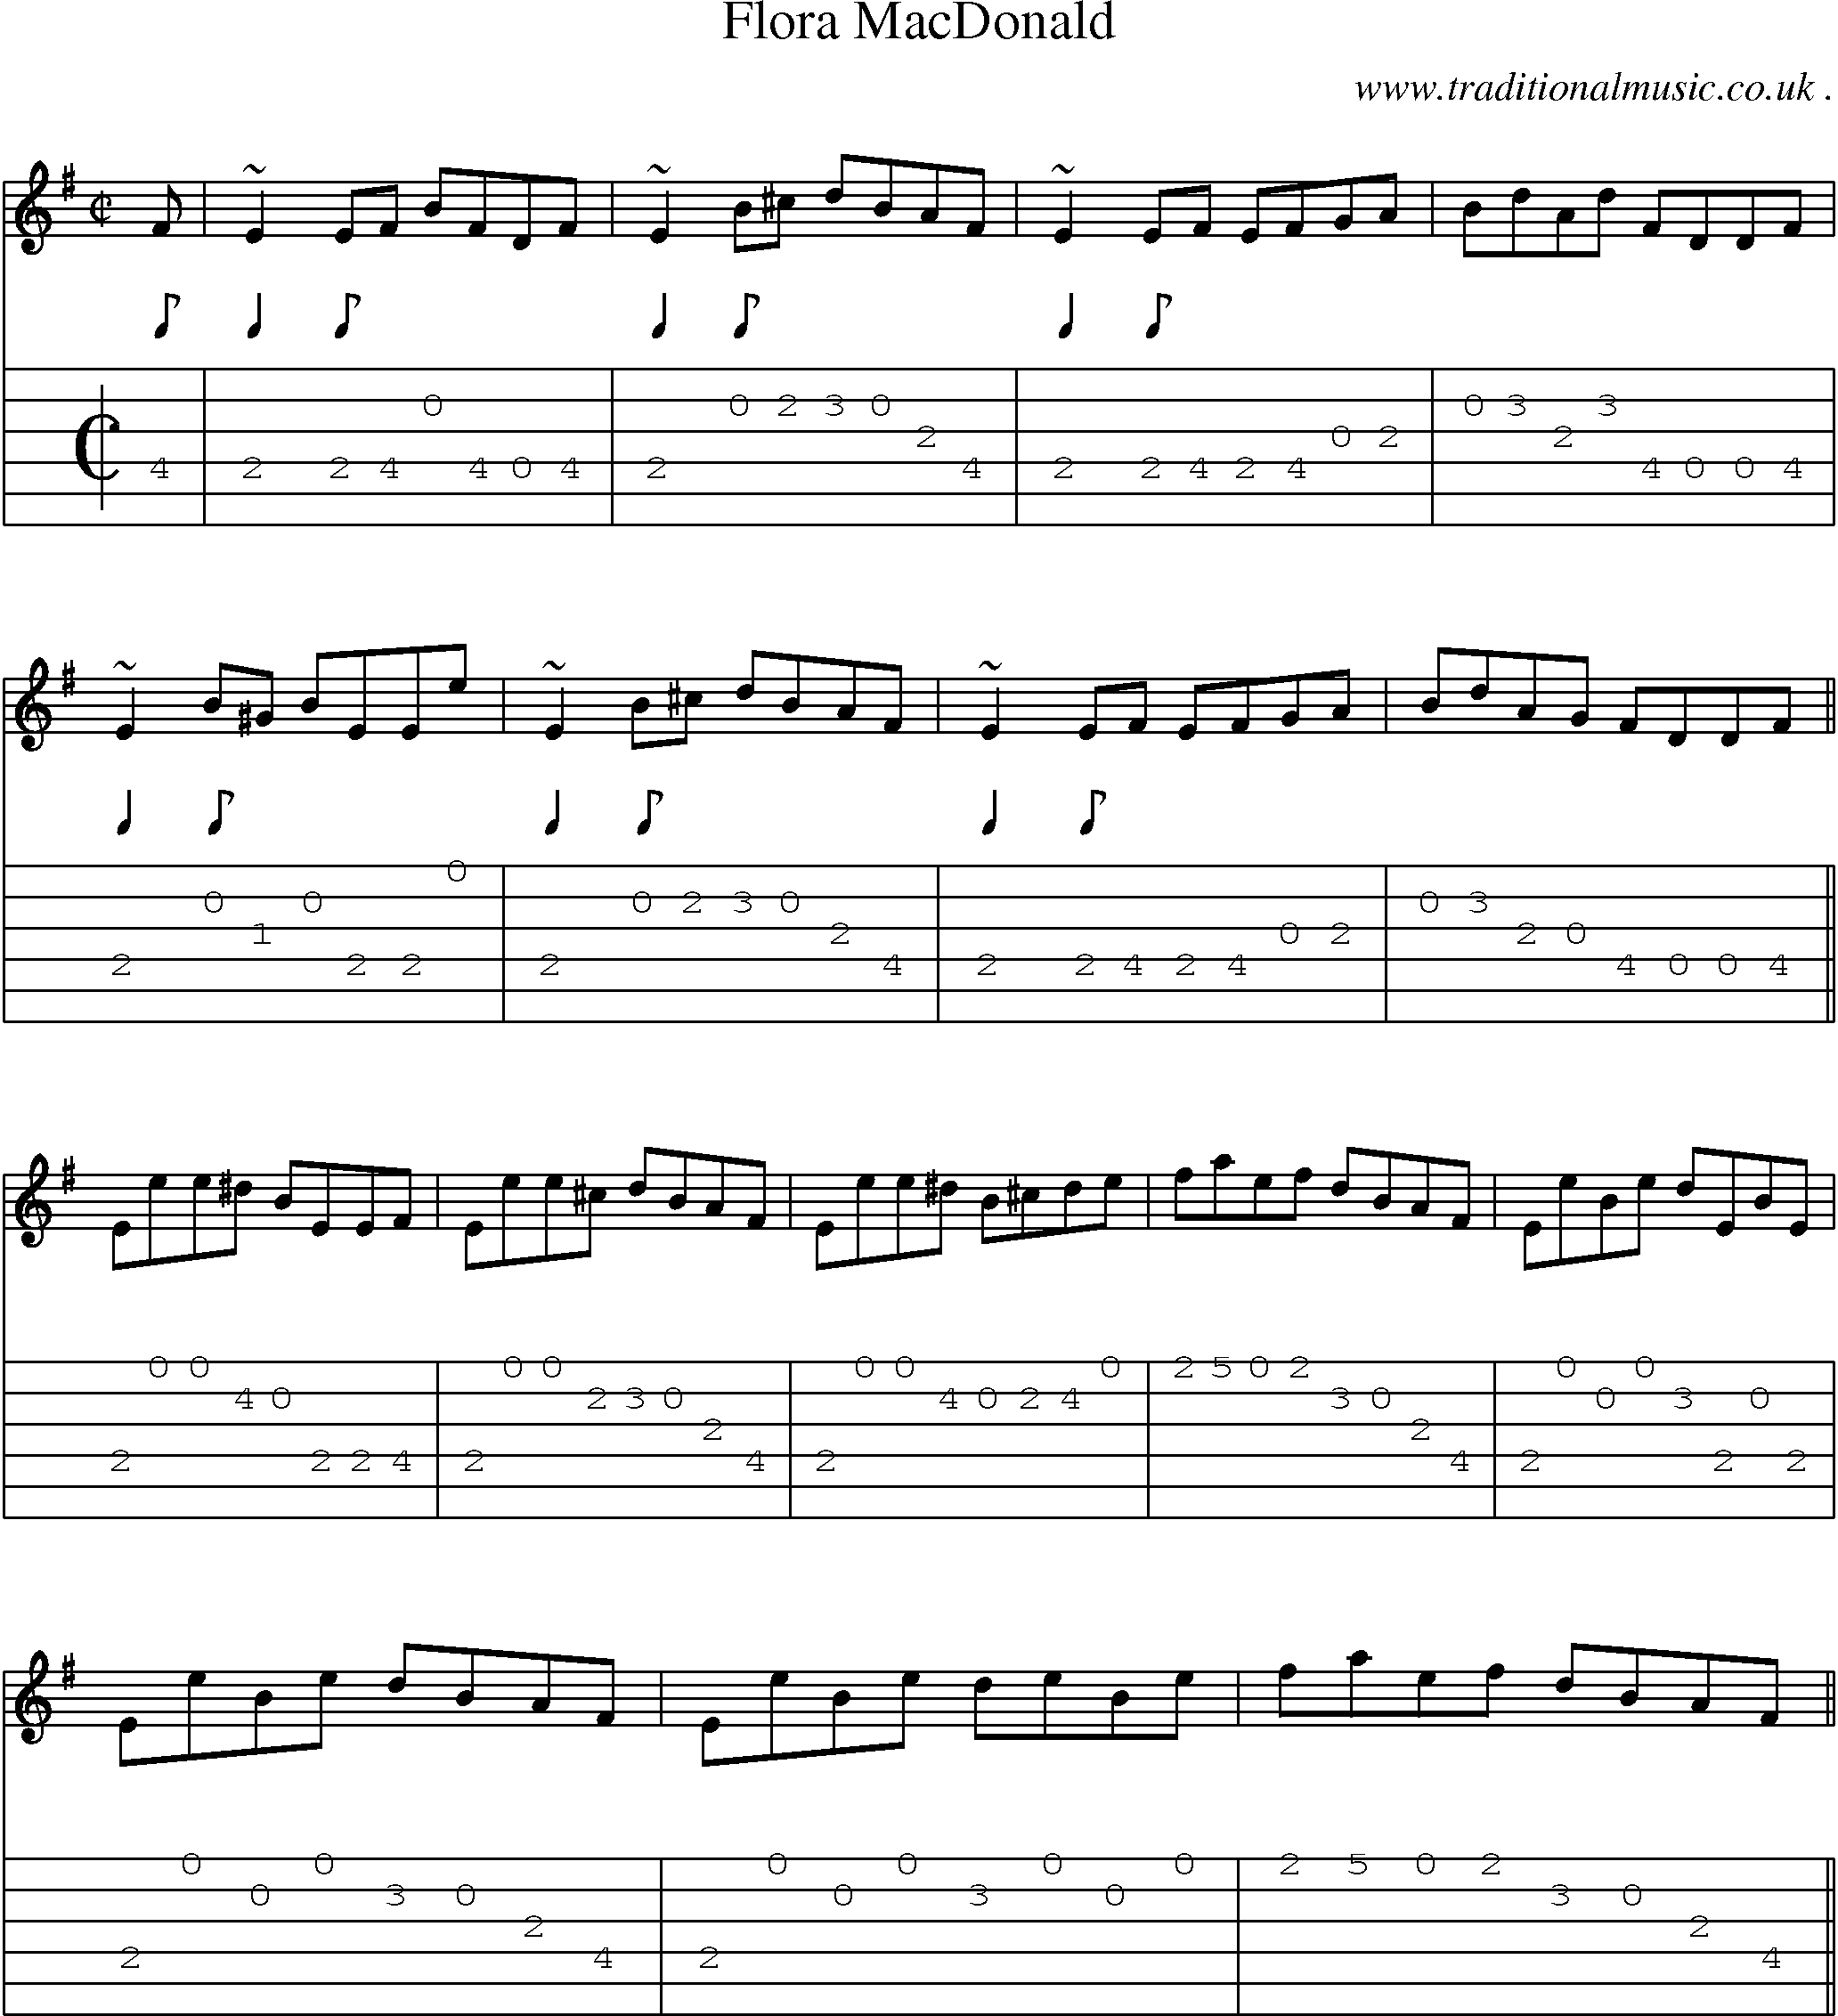 Sheet-music  score, Chords and Guitar Tabs for Flora Macdonald